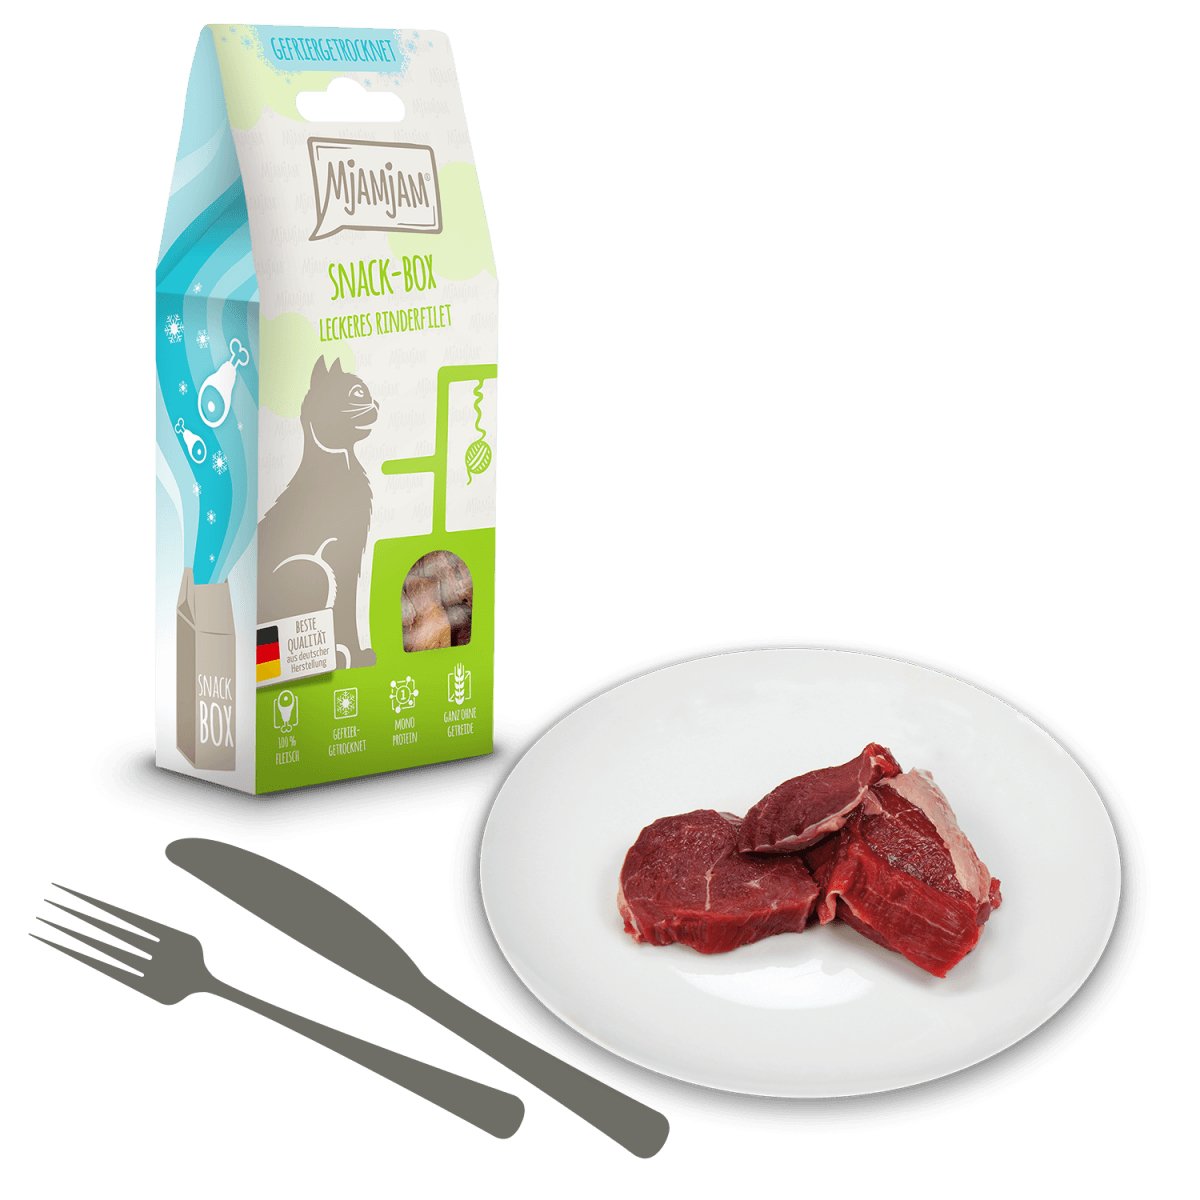 MjAMjAM Snack Box Freeze-dried Delicious Beef Fillet 35g - Pets Villa